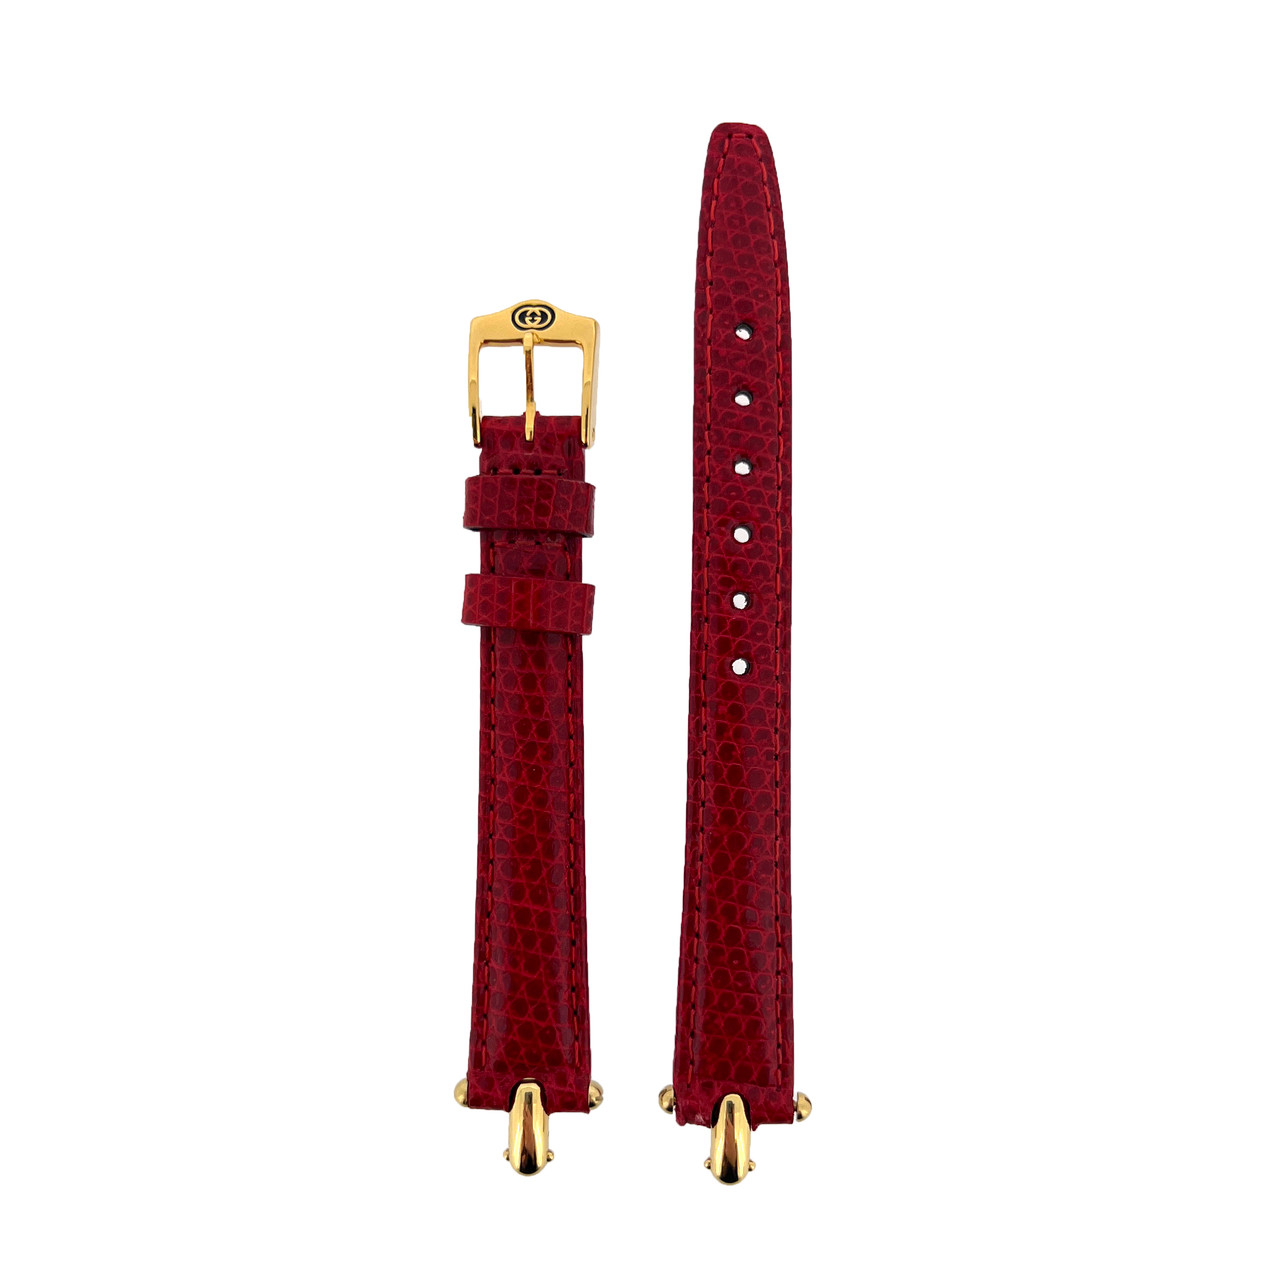 Gucci Watch Band Leather Red 1800L Ladies Strap 12mm Strap Vintage Gold Tab